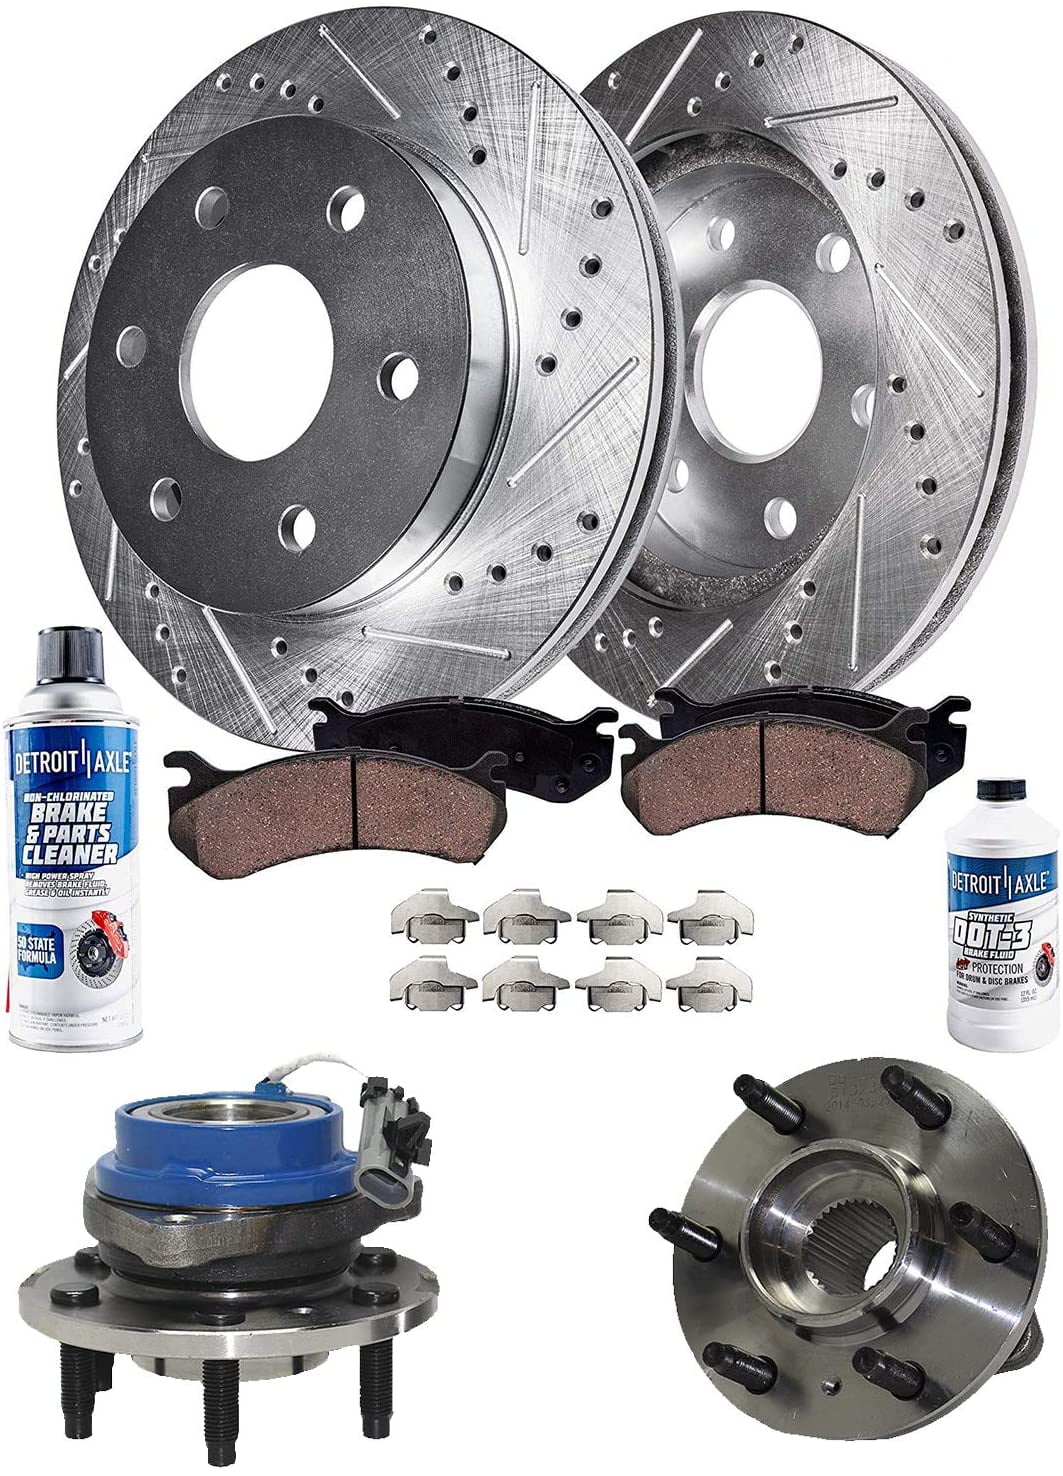 2006-2008 Chevy Uplander Detroit Axle Front and Rear Disc Brake Kit Rotors w/Ceramic Pads w/Hardware & Brake Kit Cleaner & Fluid for 2006 2007 Buick Terraza/Saturn Relay 